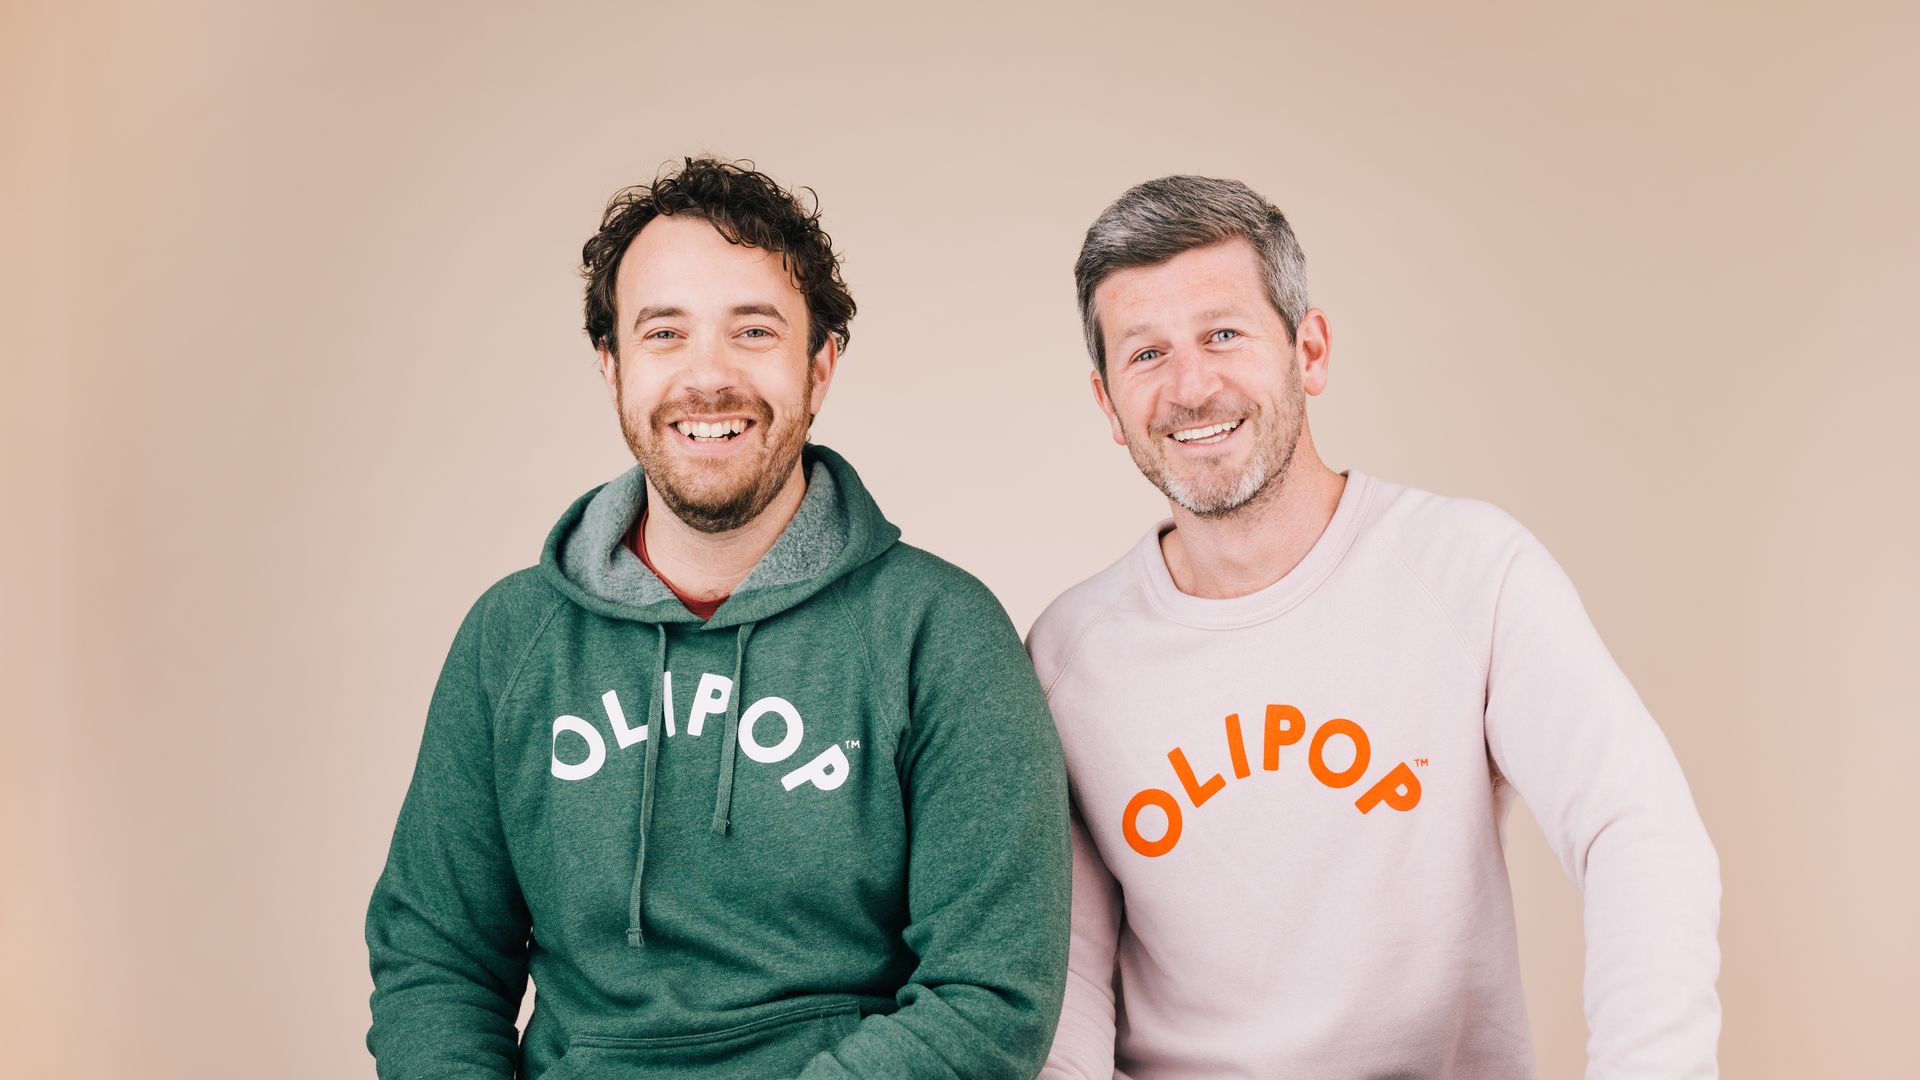 Olipop's founders Ben Goodwin, who is wearing a green hoodie, and David Lester, who is wearing a pink sweatshirt.